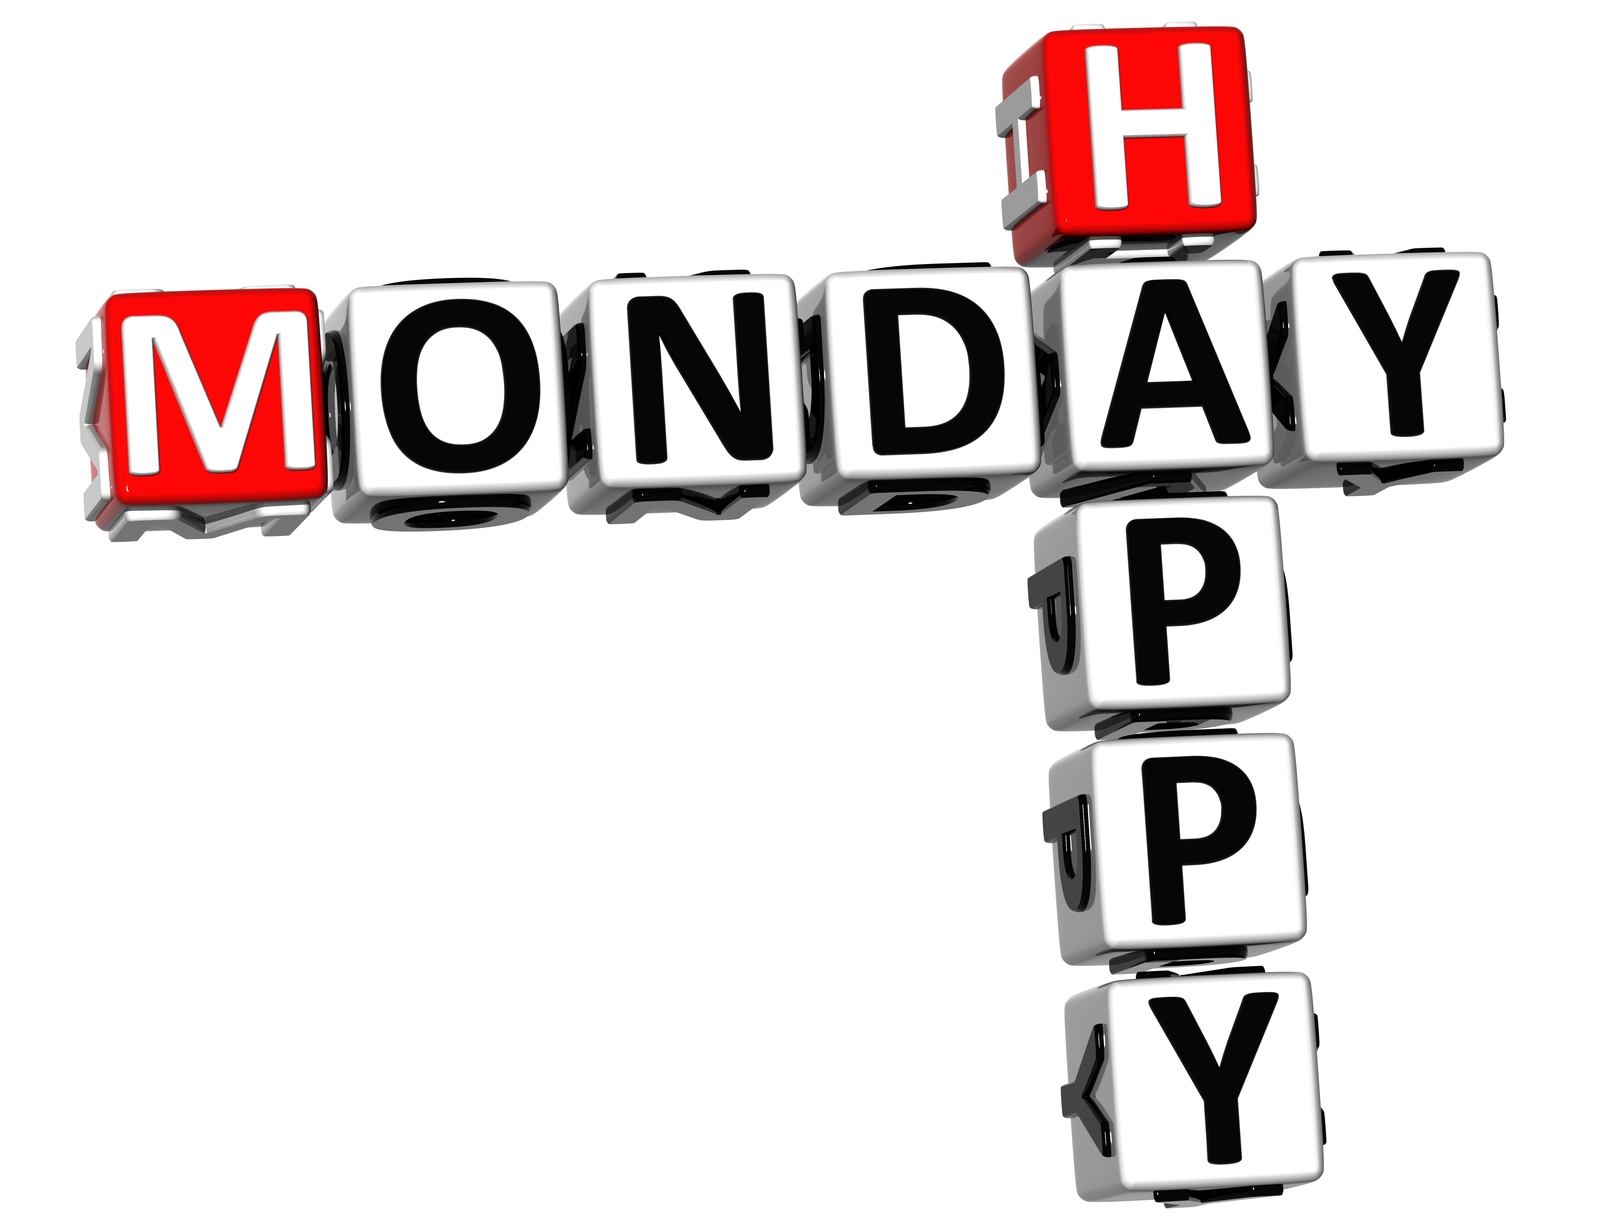 Happy Monday Wishes HD Image Wallpaper Under The